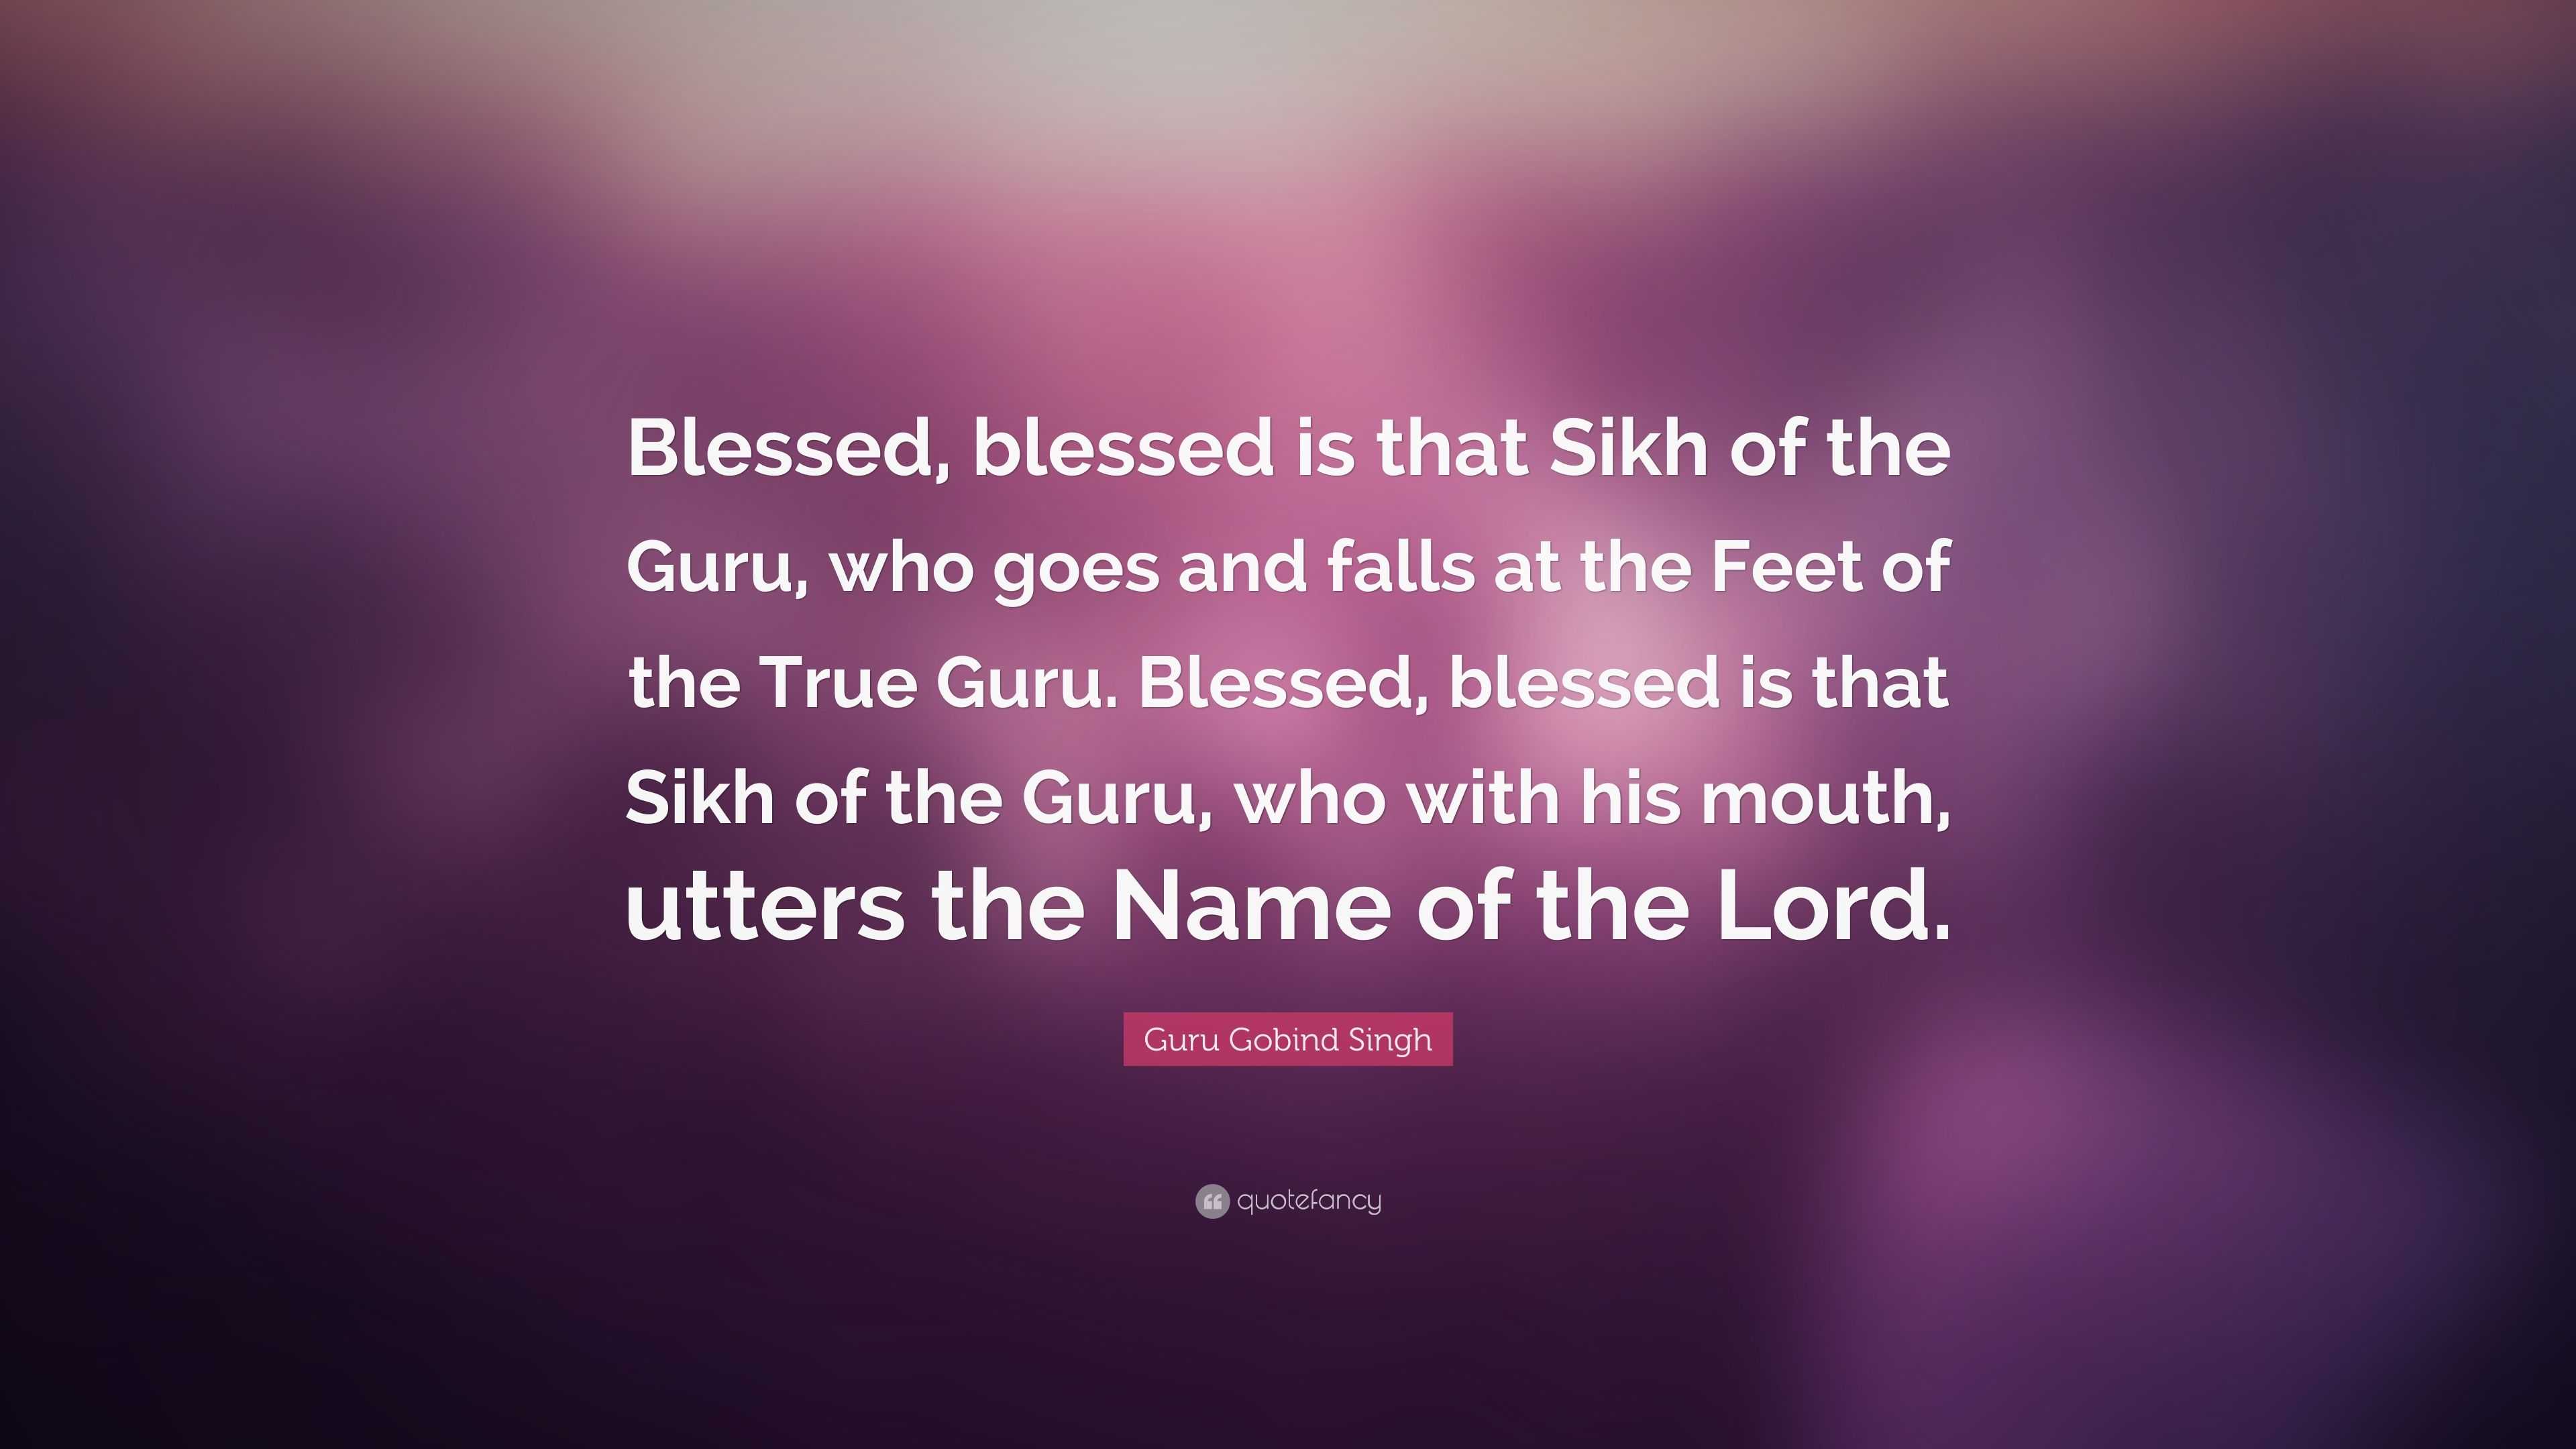 Guru Gobind Singh Quote: “Blessed, blessed is that Sikh of ...
 True Sikh Quotes